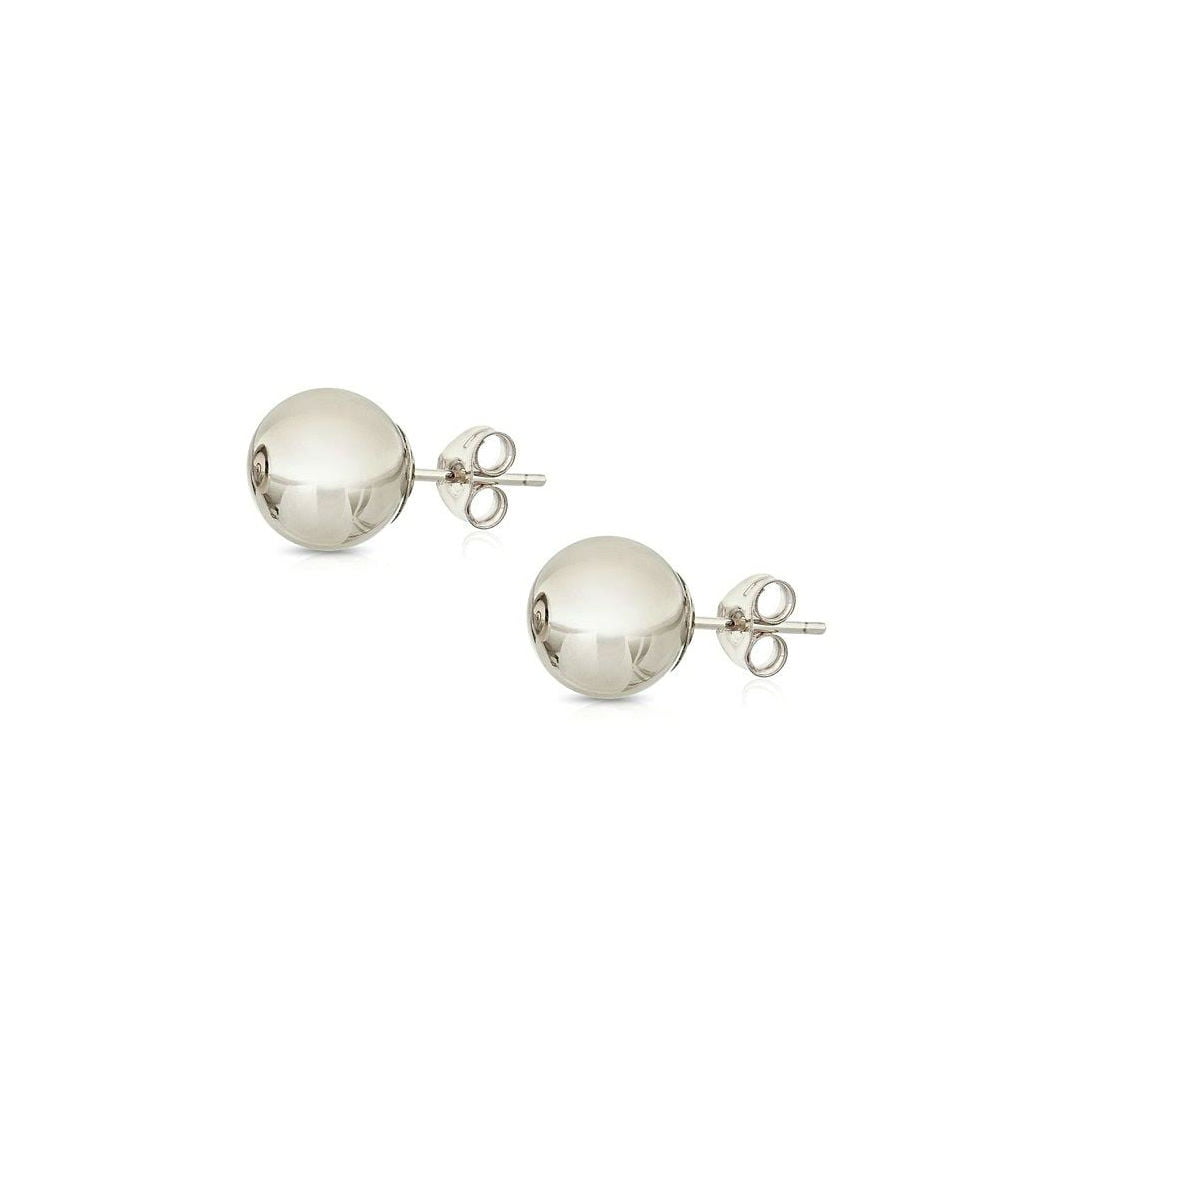 4mm 5mm Aeon Set of 3 Pairs of 925 Sterling Silver  Round Ball Studs 3mm